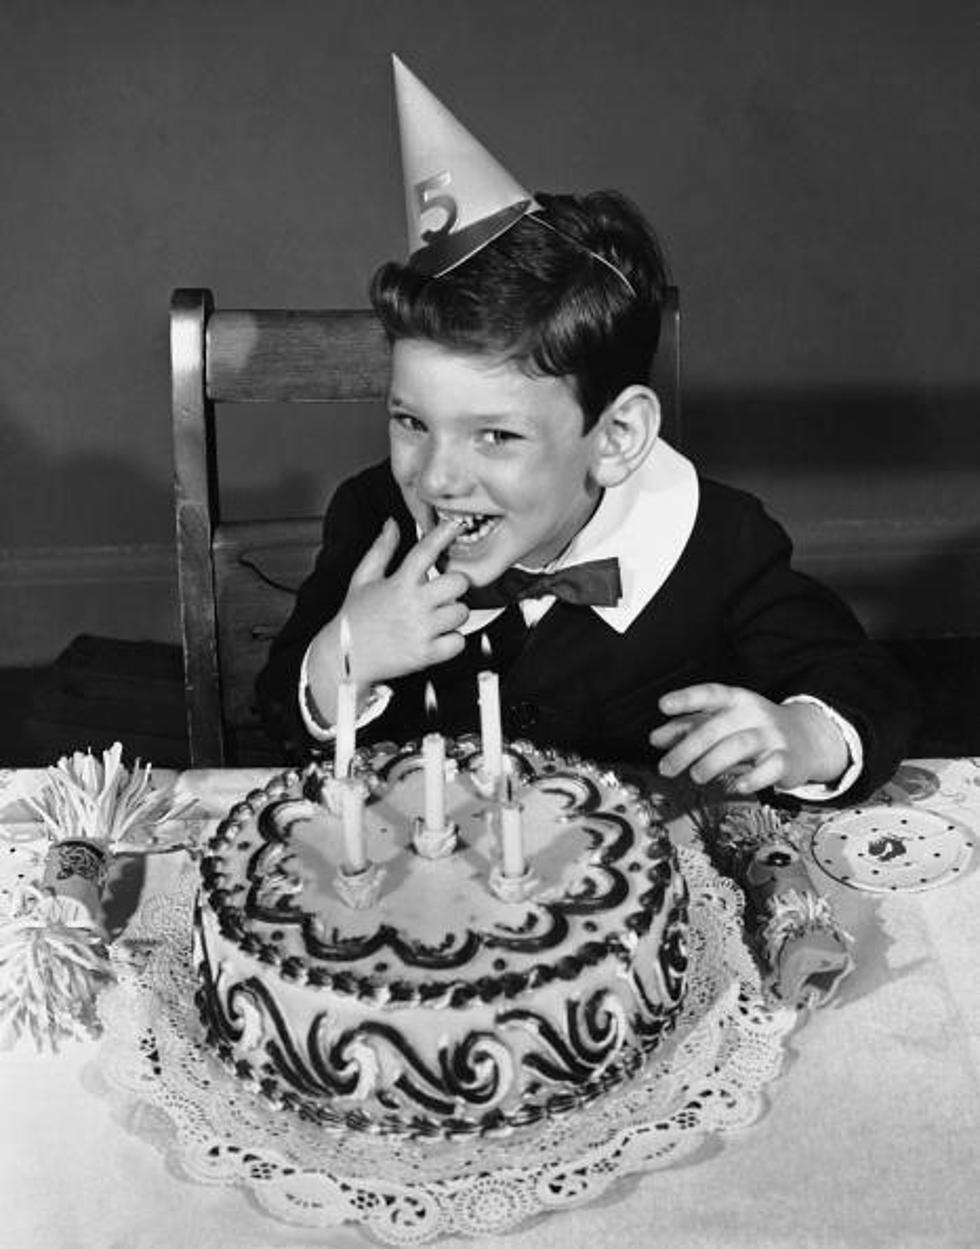 Want To Wish Someone A Happy Birthday On The Radio? Fill Out Our New Birthday Form!